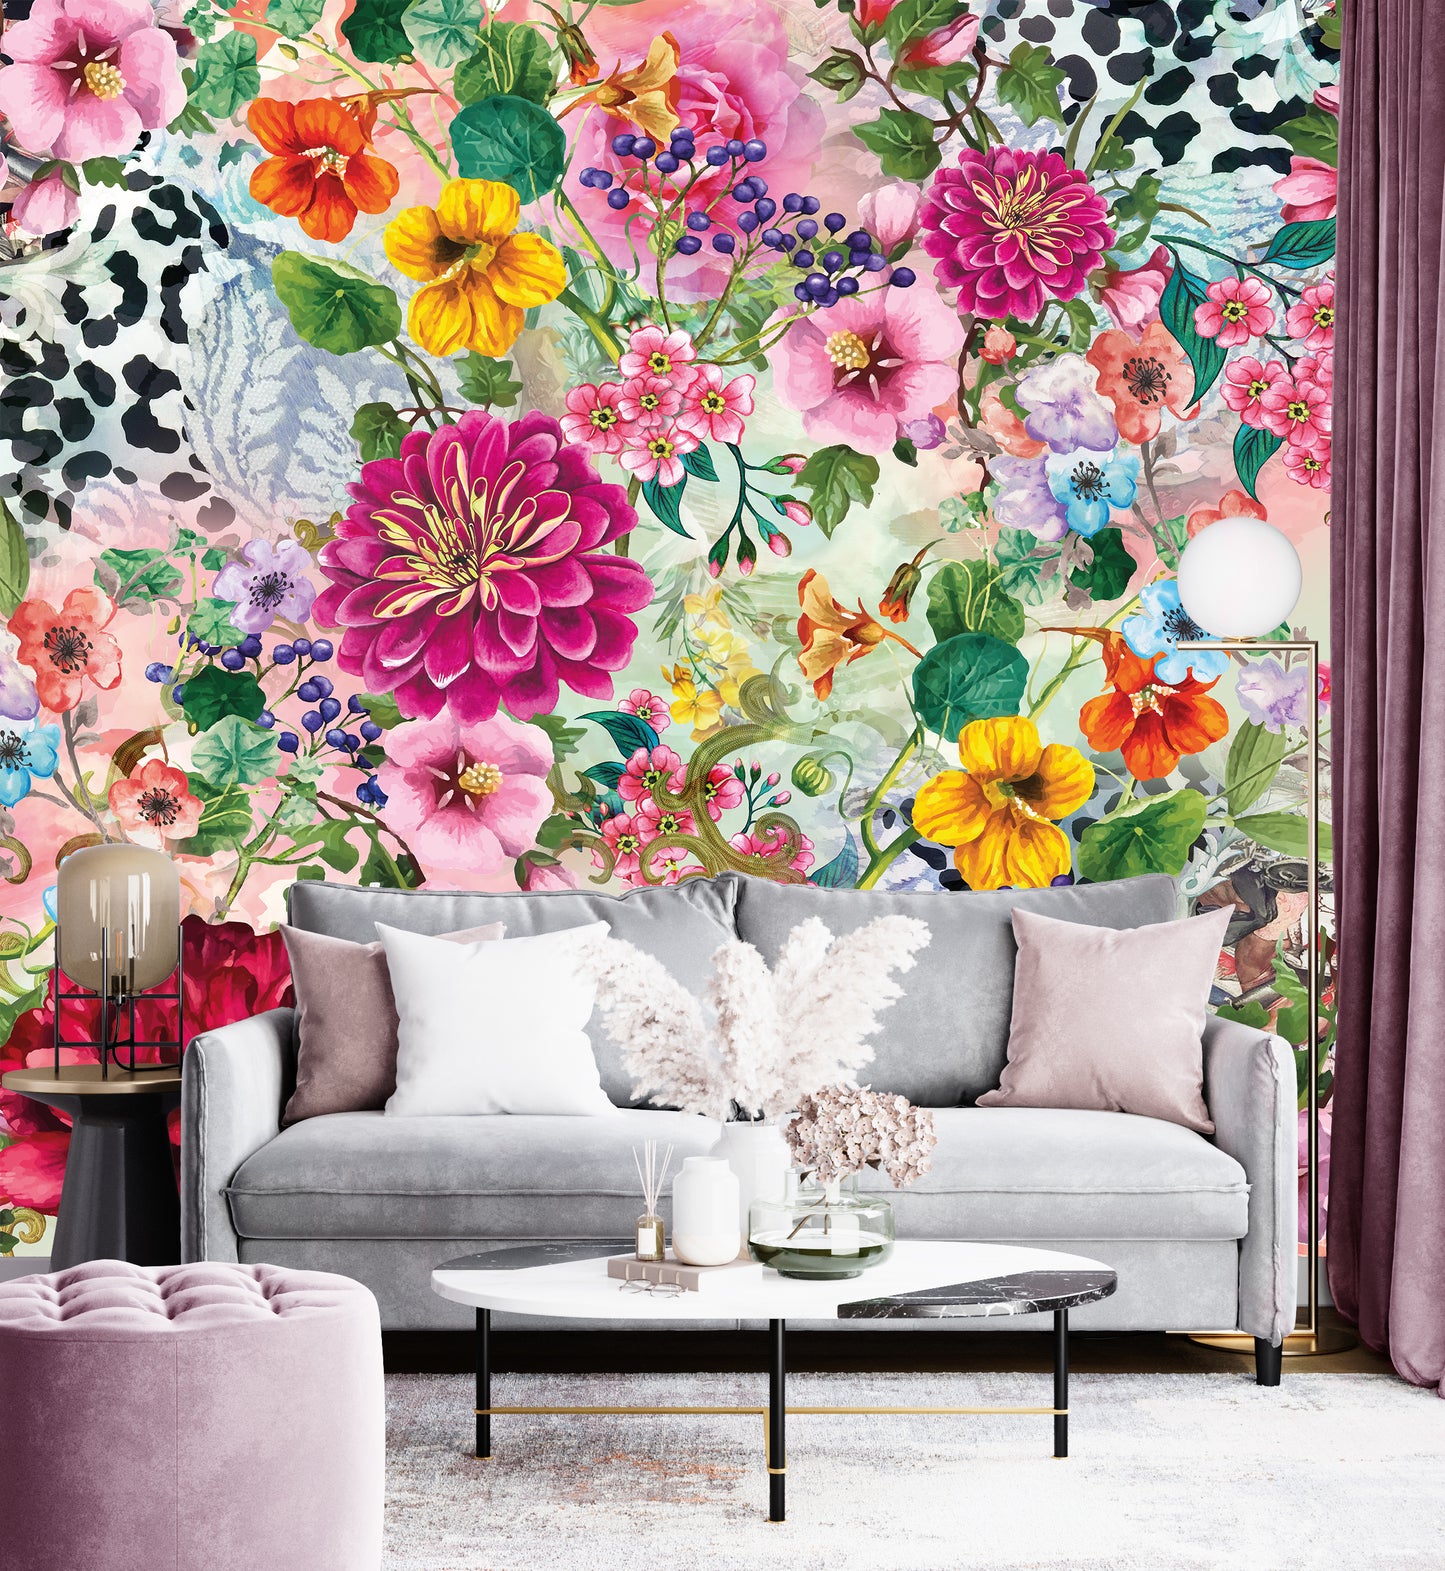 Melli Mello Floral attraction photowall wallpaper floral bombastic animal print bold deco eyecatcher be different living room deco 